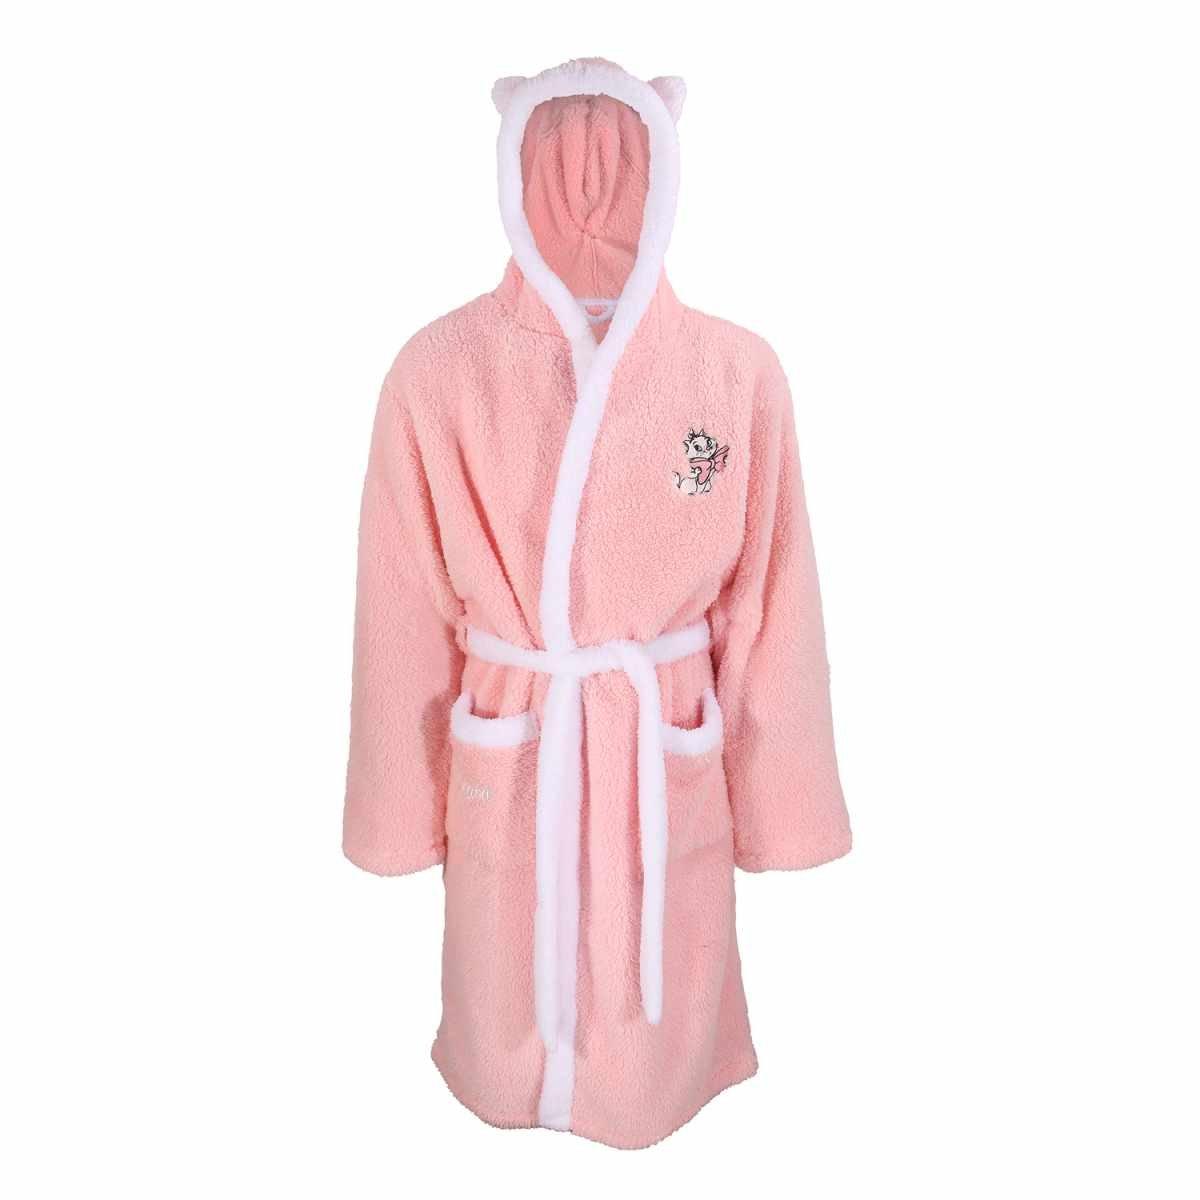 Marie Dressing Gown